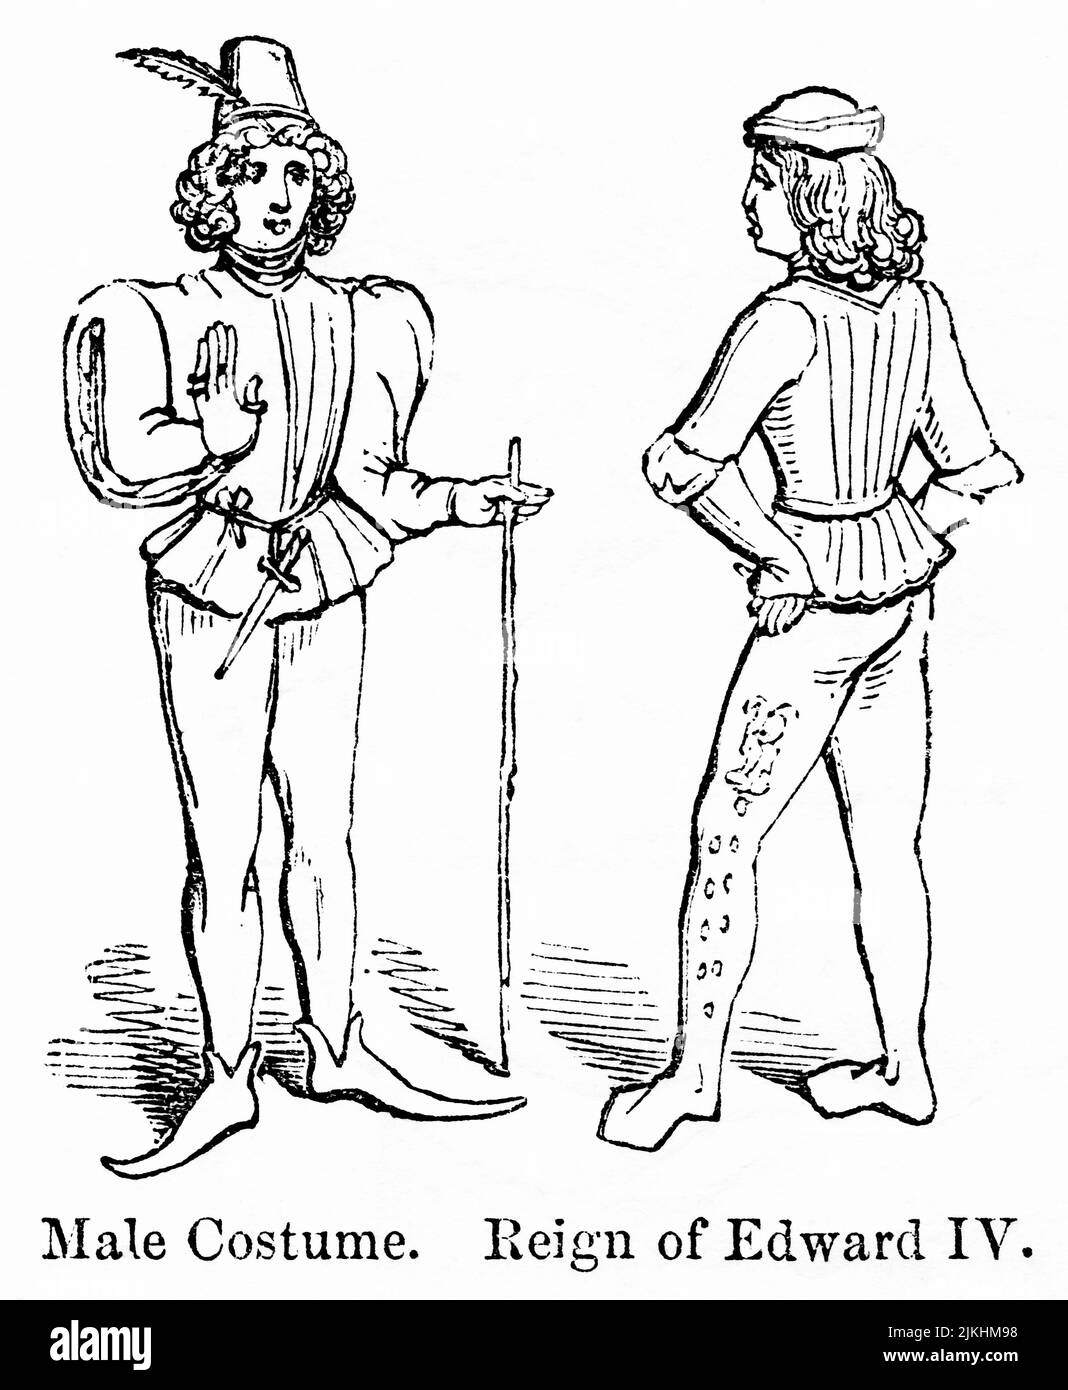 Male Costume, Reign of Edward IV, Illustration from the Book, 'John Cassel’s Illustrated History of England, Volume II', text by William Howitt, Cassell, Petter, and Galpin, London, 1858 Stock Photo